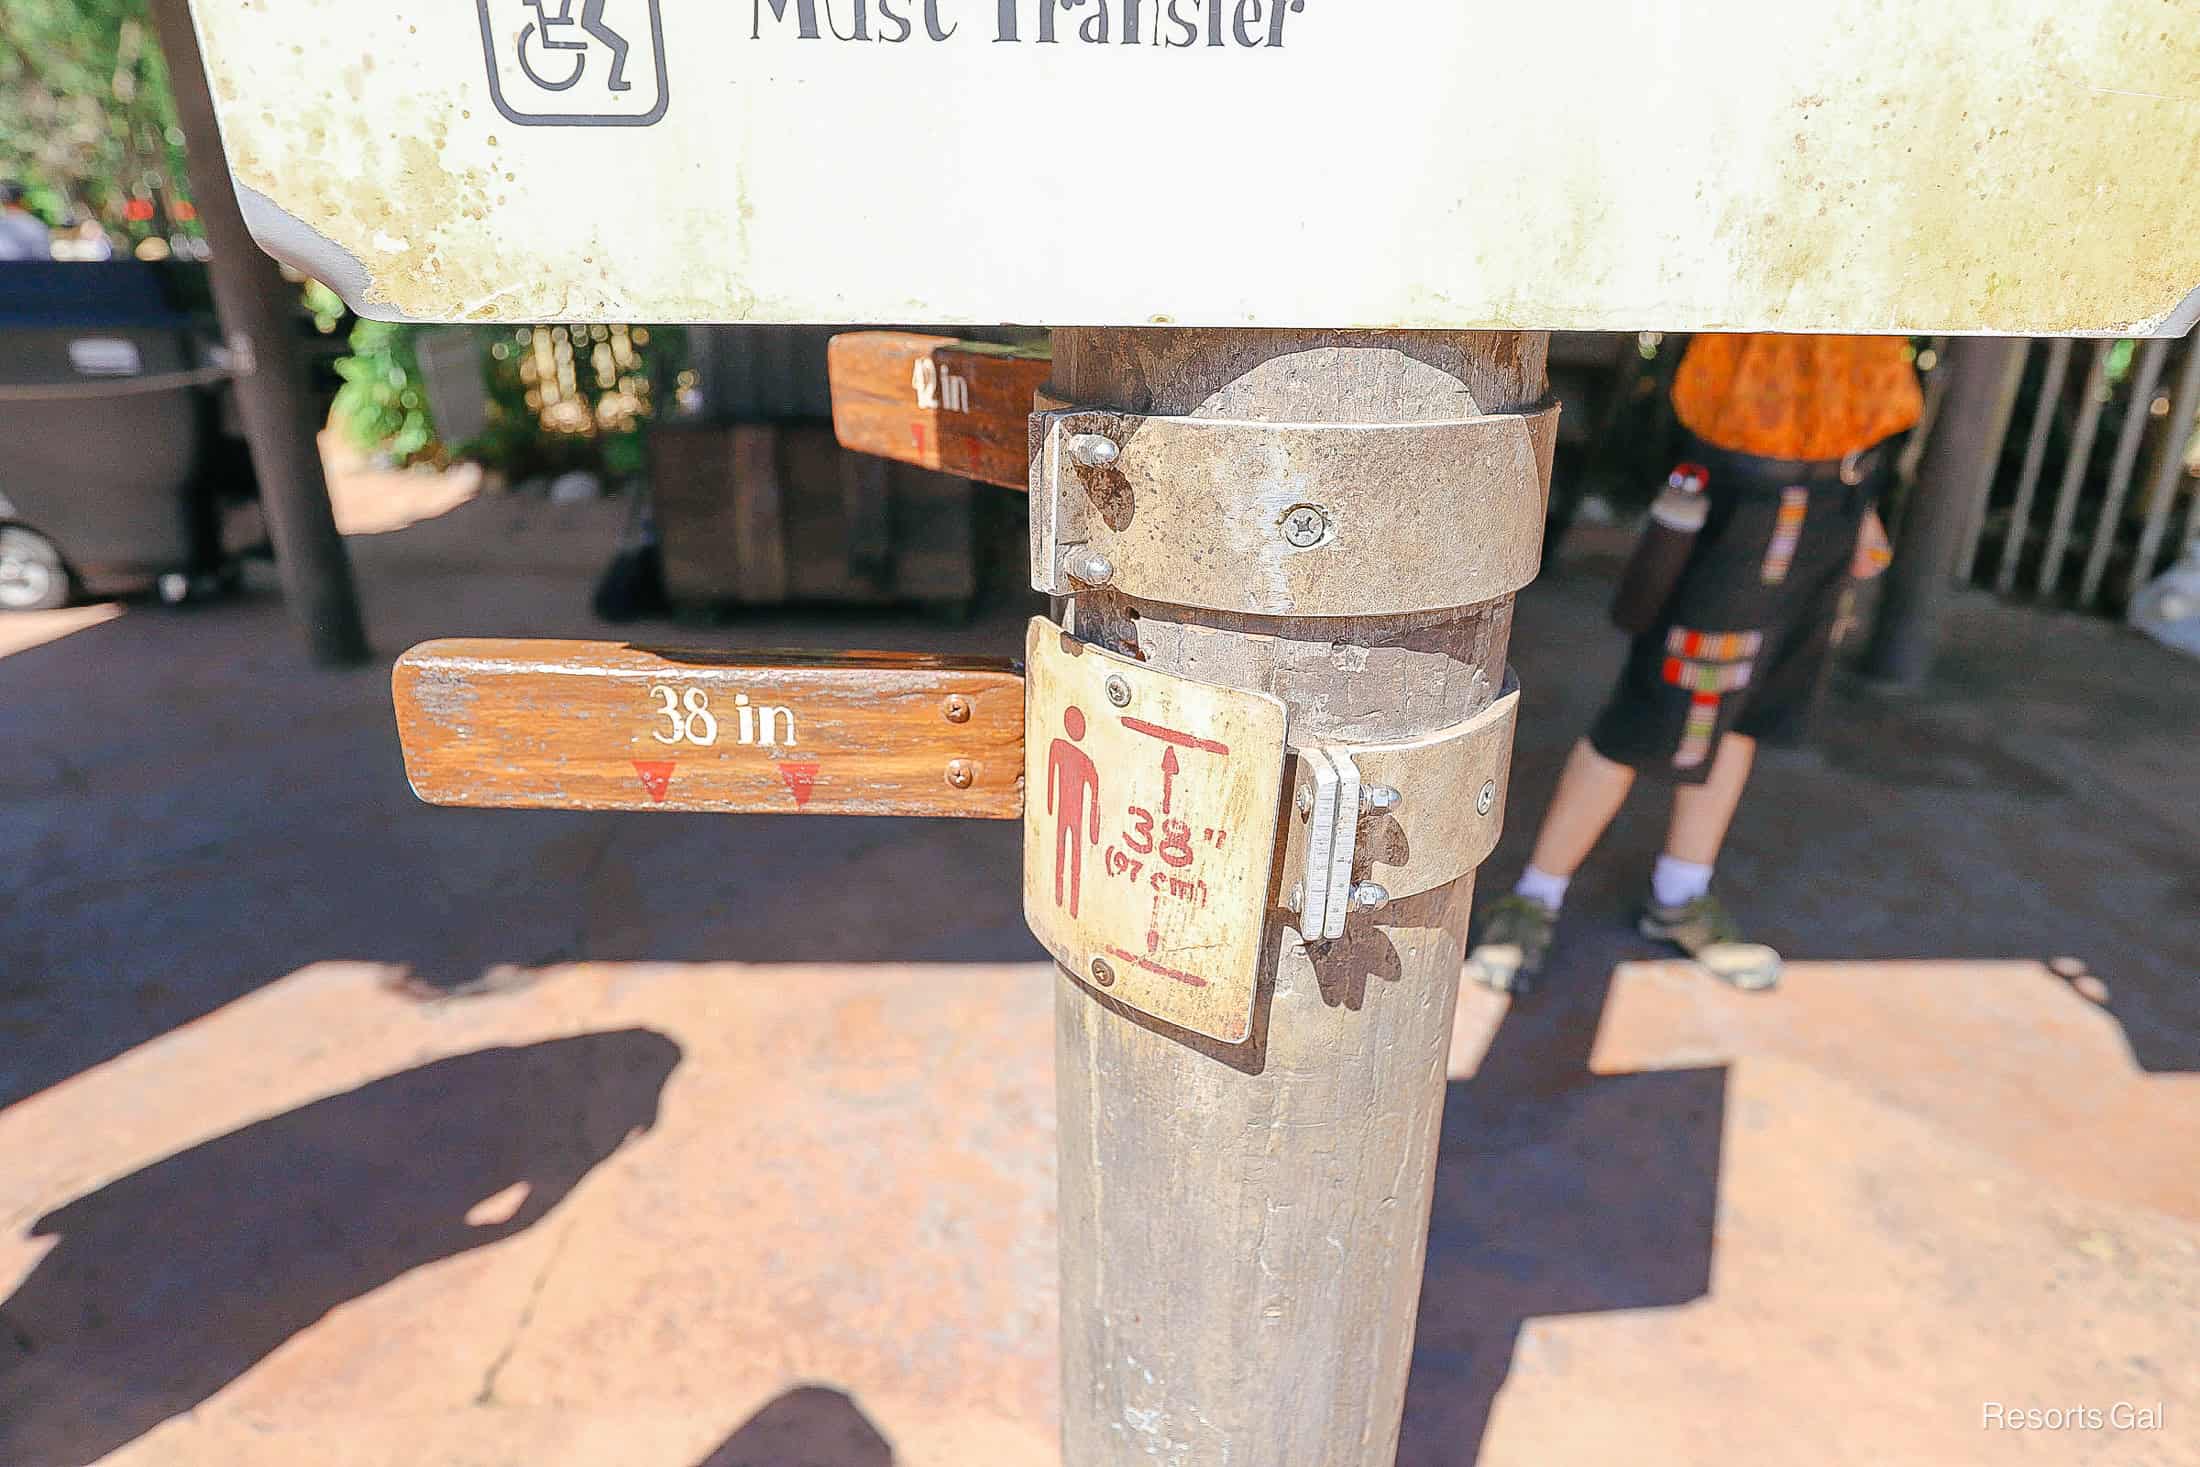 the height requirement marker for Kali River Rapids (38")